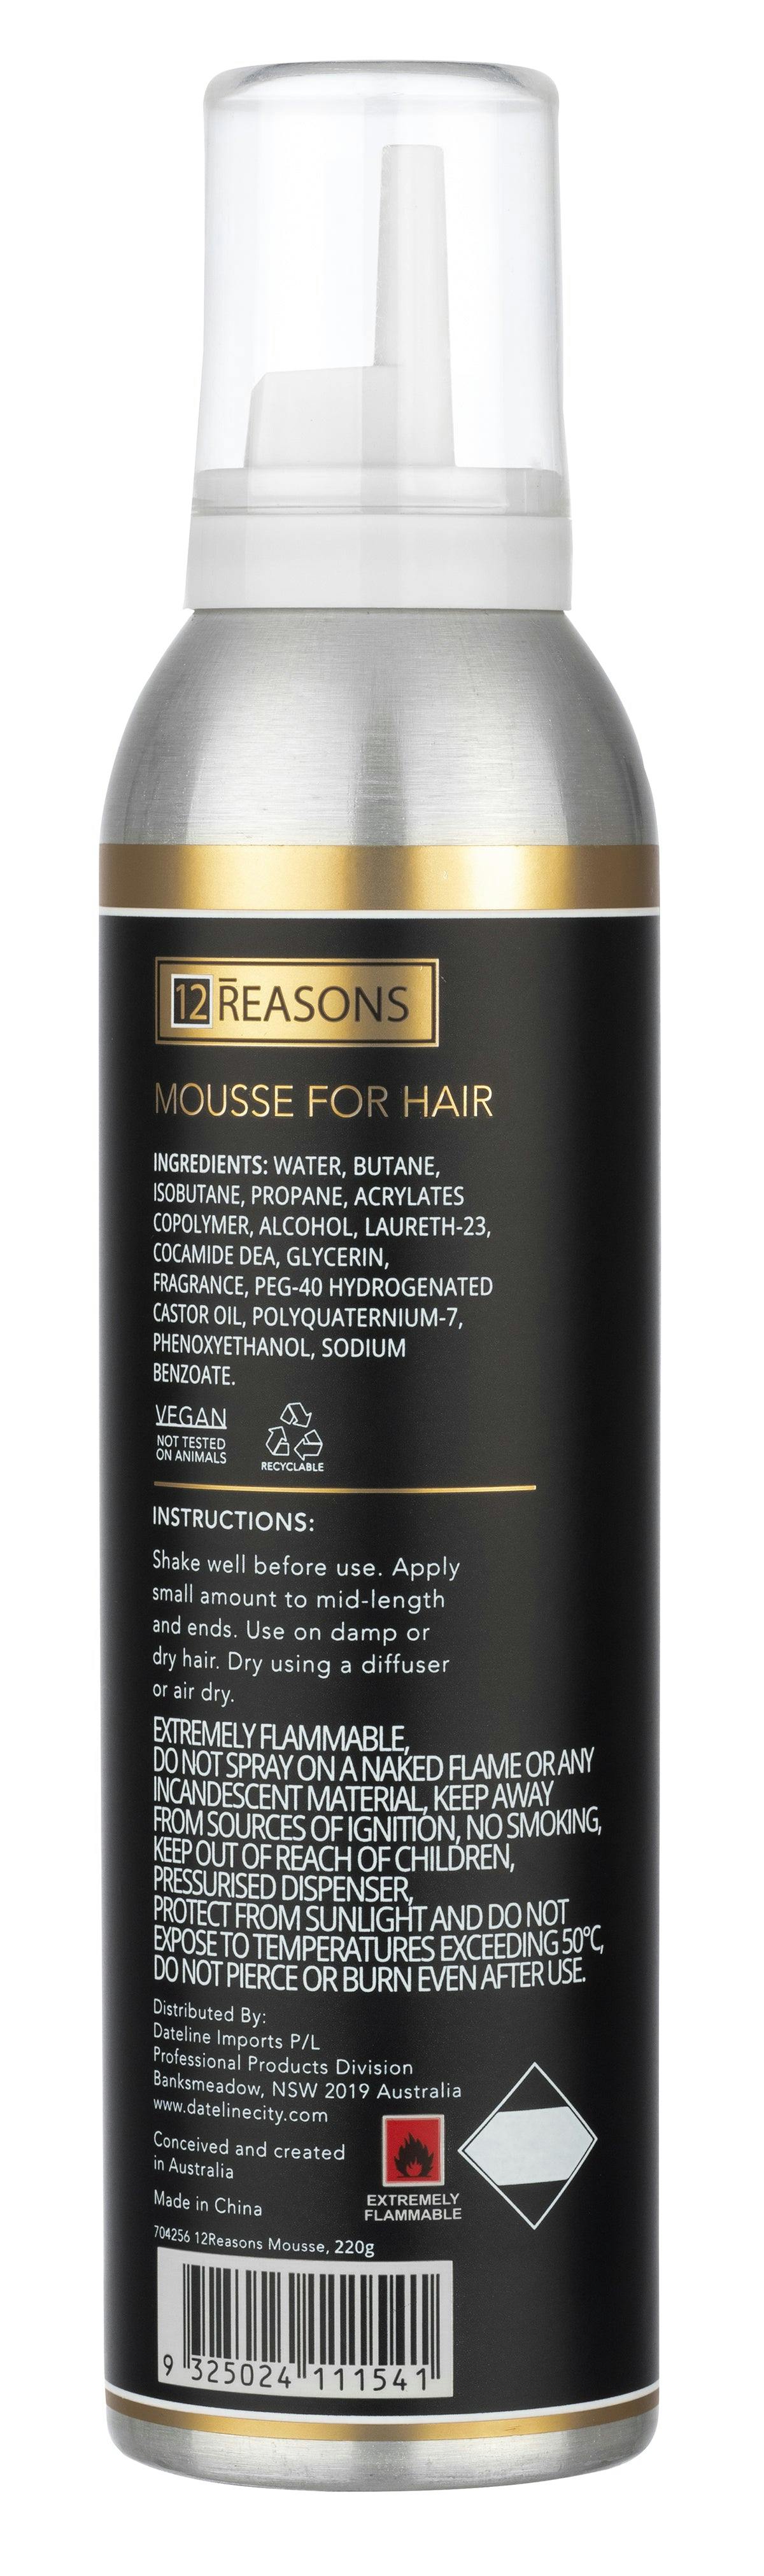 12 Reasons The Absolute Sculpt Mousse - 250ml